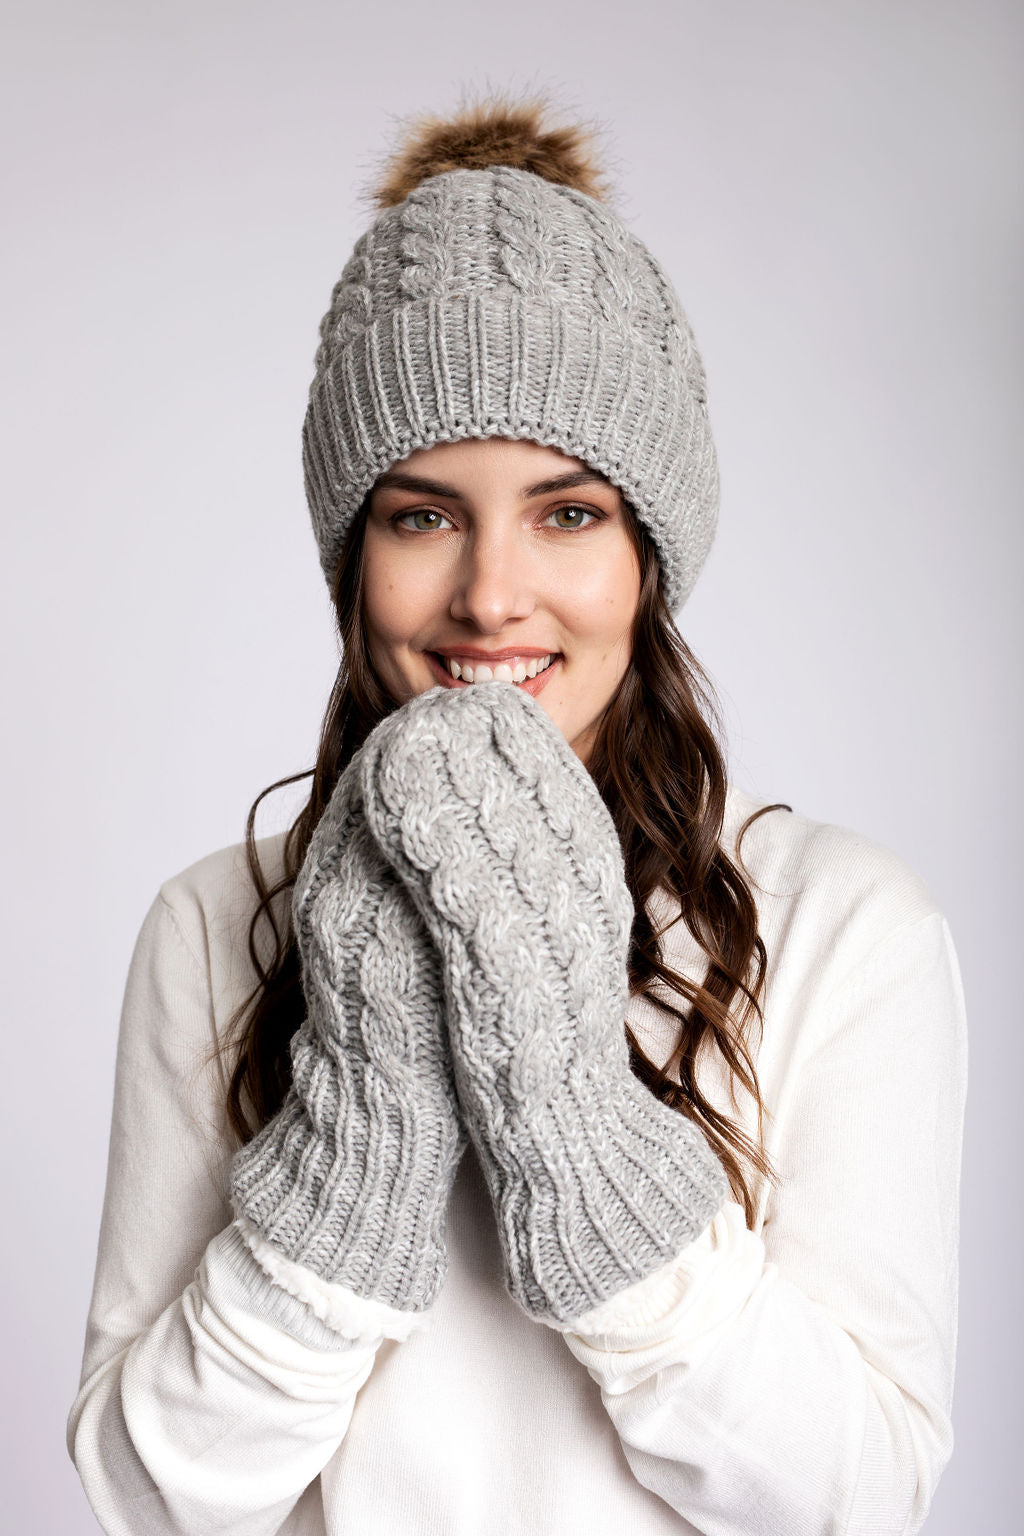 Just Cozy Knit Mittens and Hat Set - Super Comfy and Cozy Lined